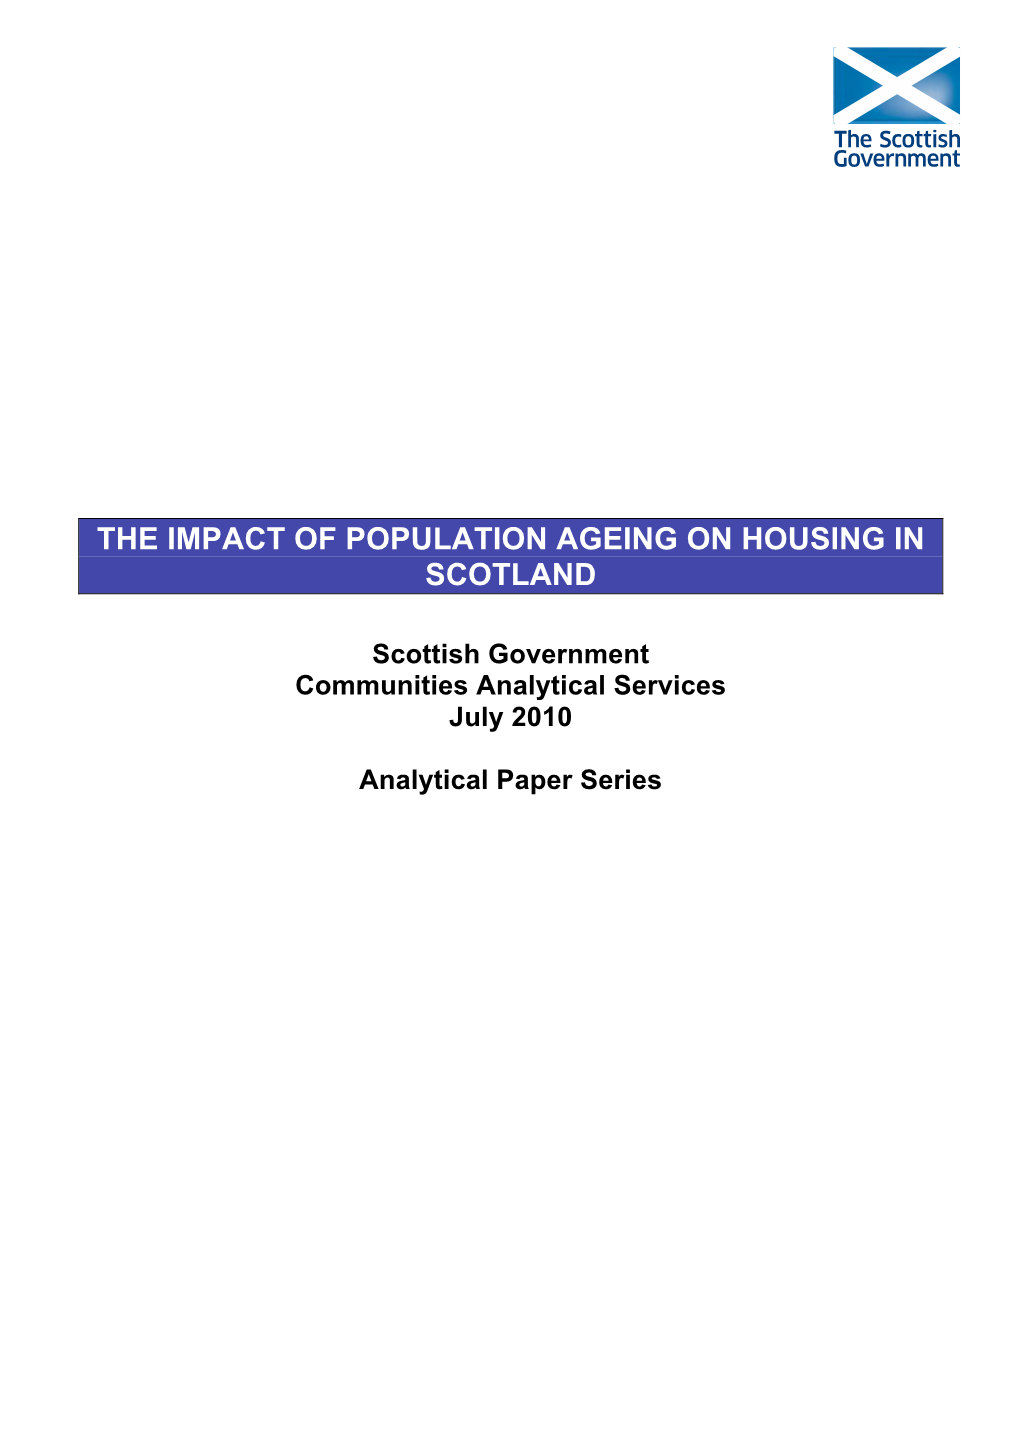 The Impact of Population Ageing on Housing in Scotland